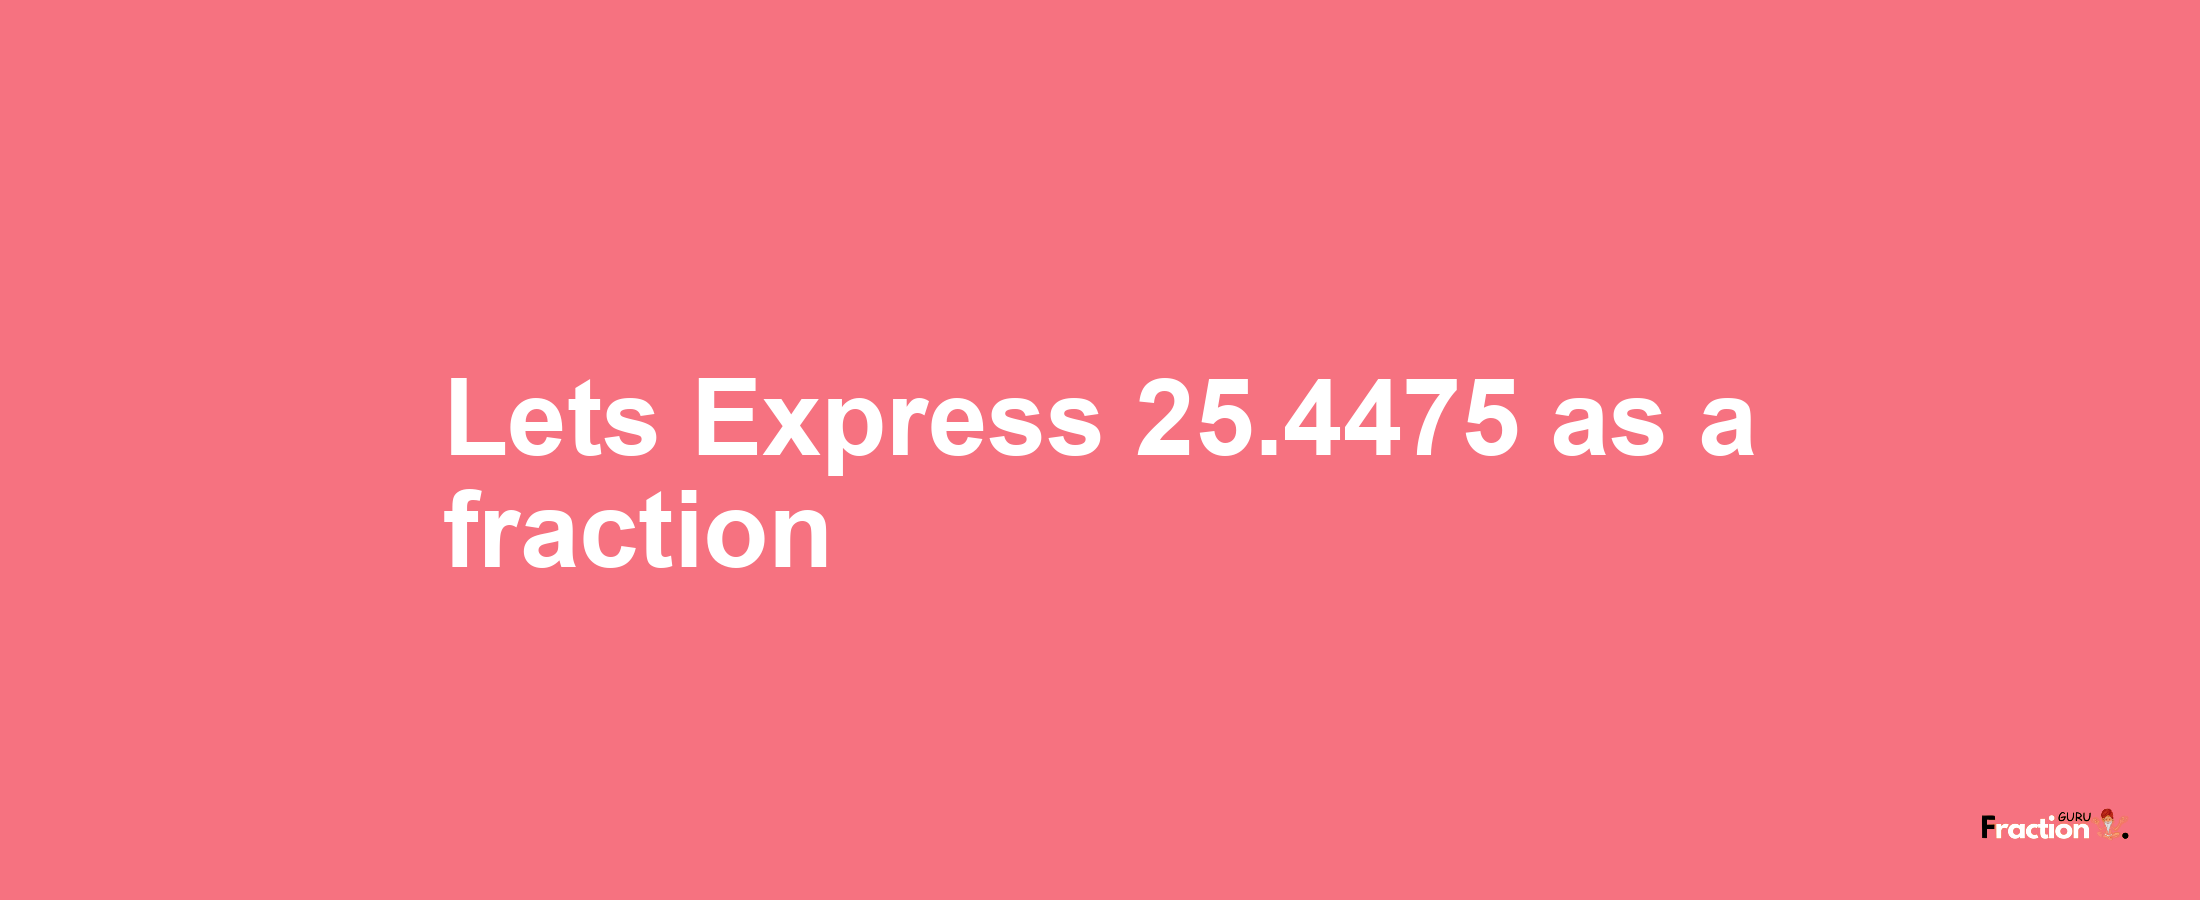 Lets Express 25.4475 as afraction